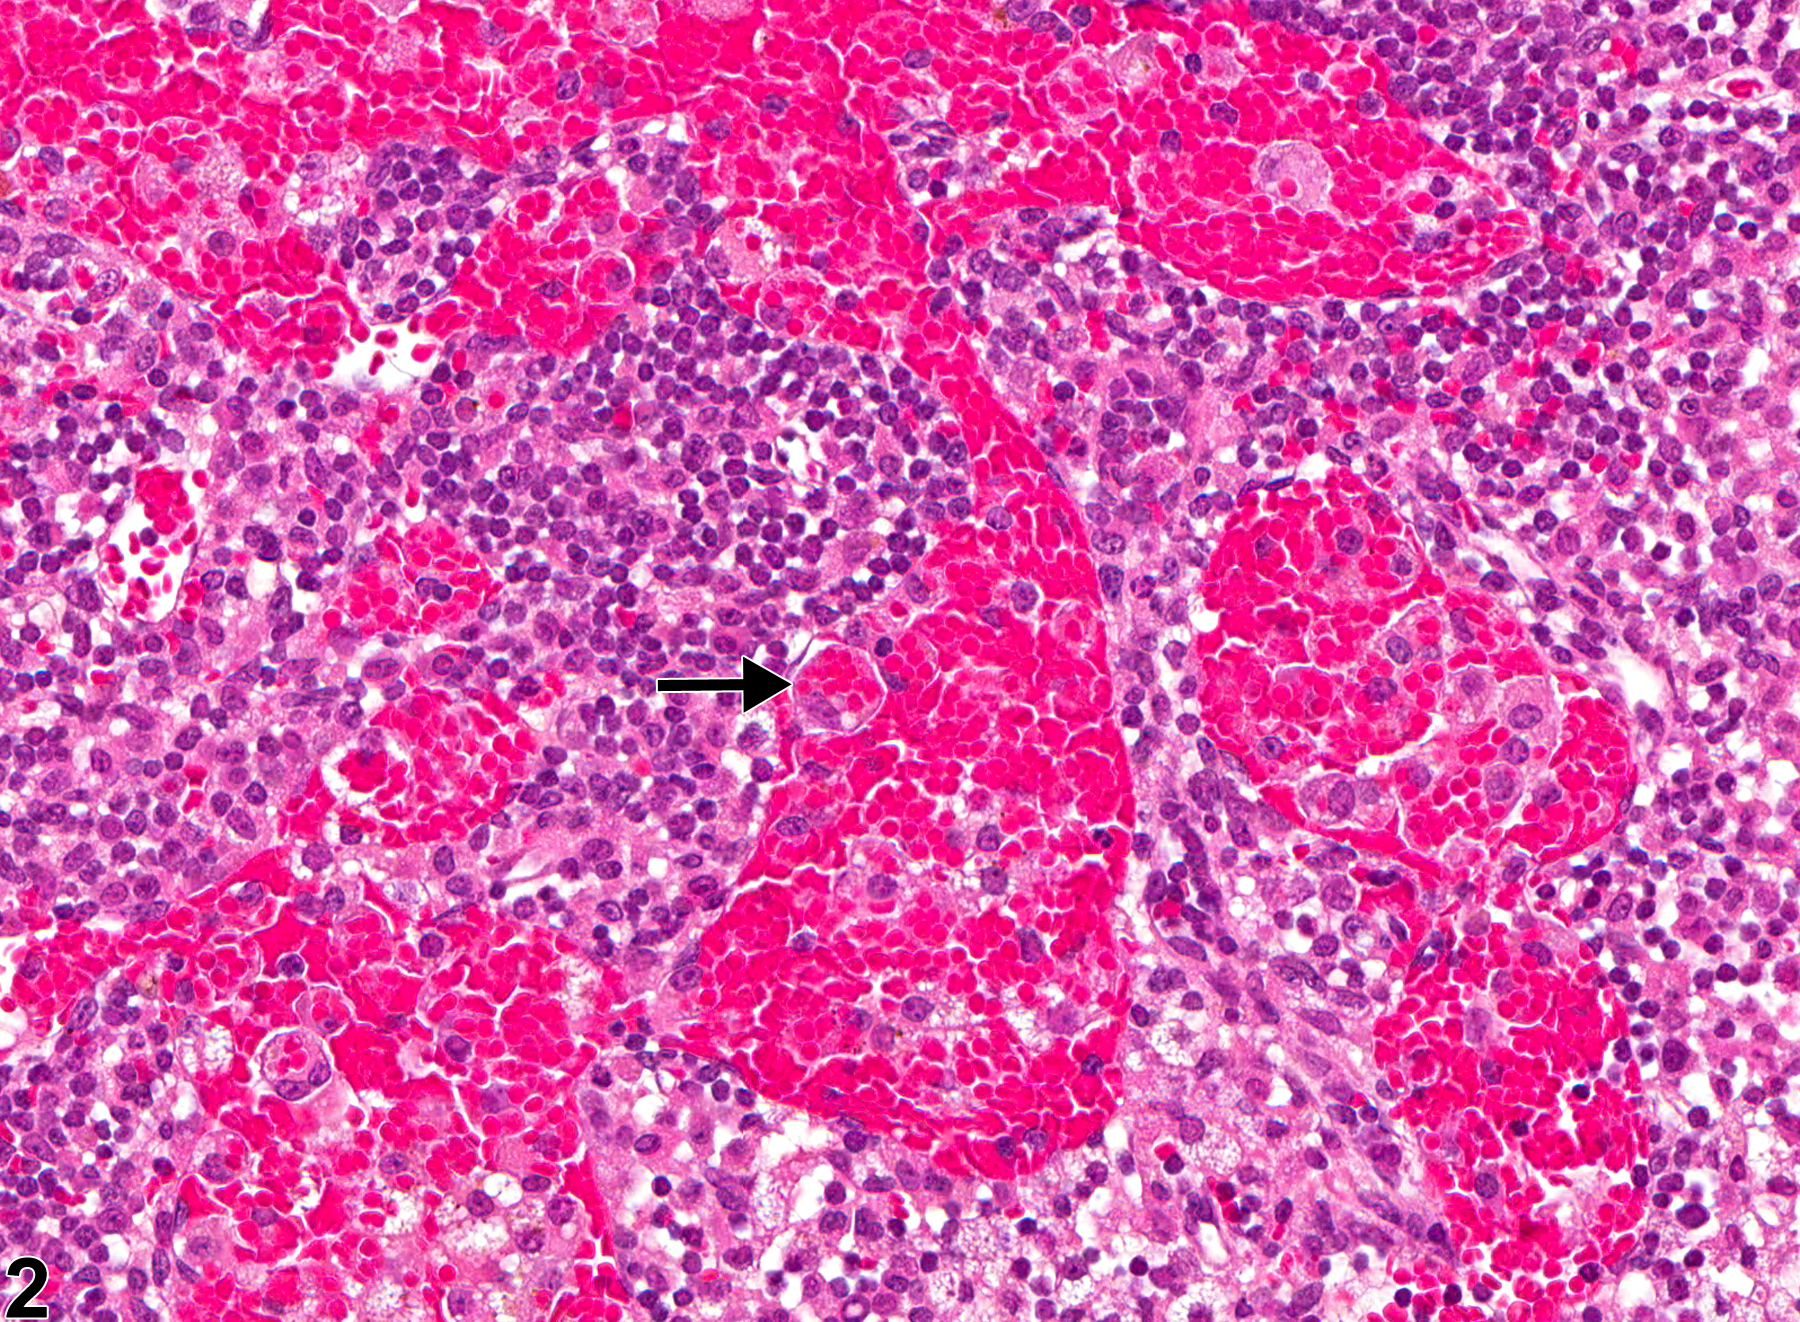 Image of sinus erythrocytosis in the lymph node from a female B6C3F1/N mouse in a chronic study